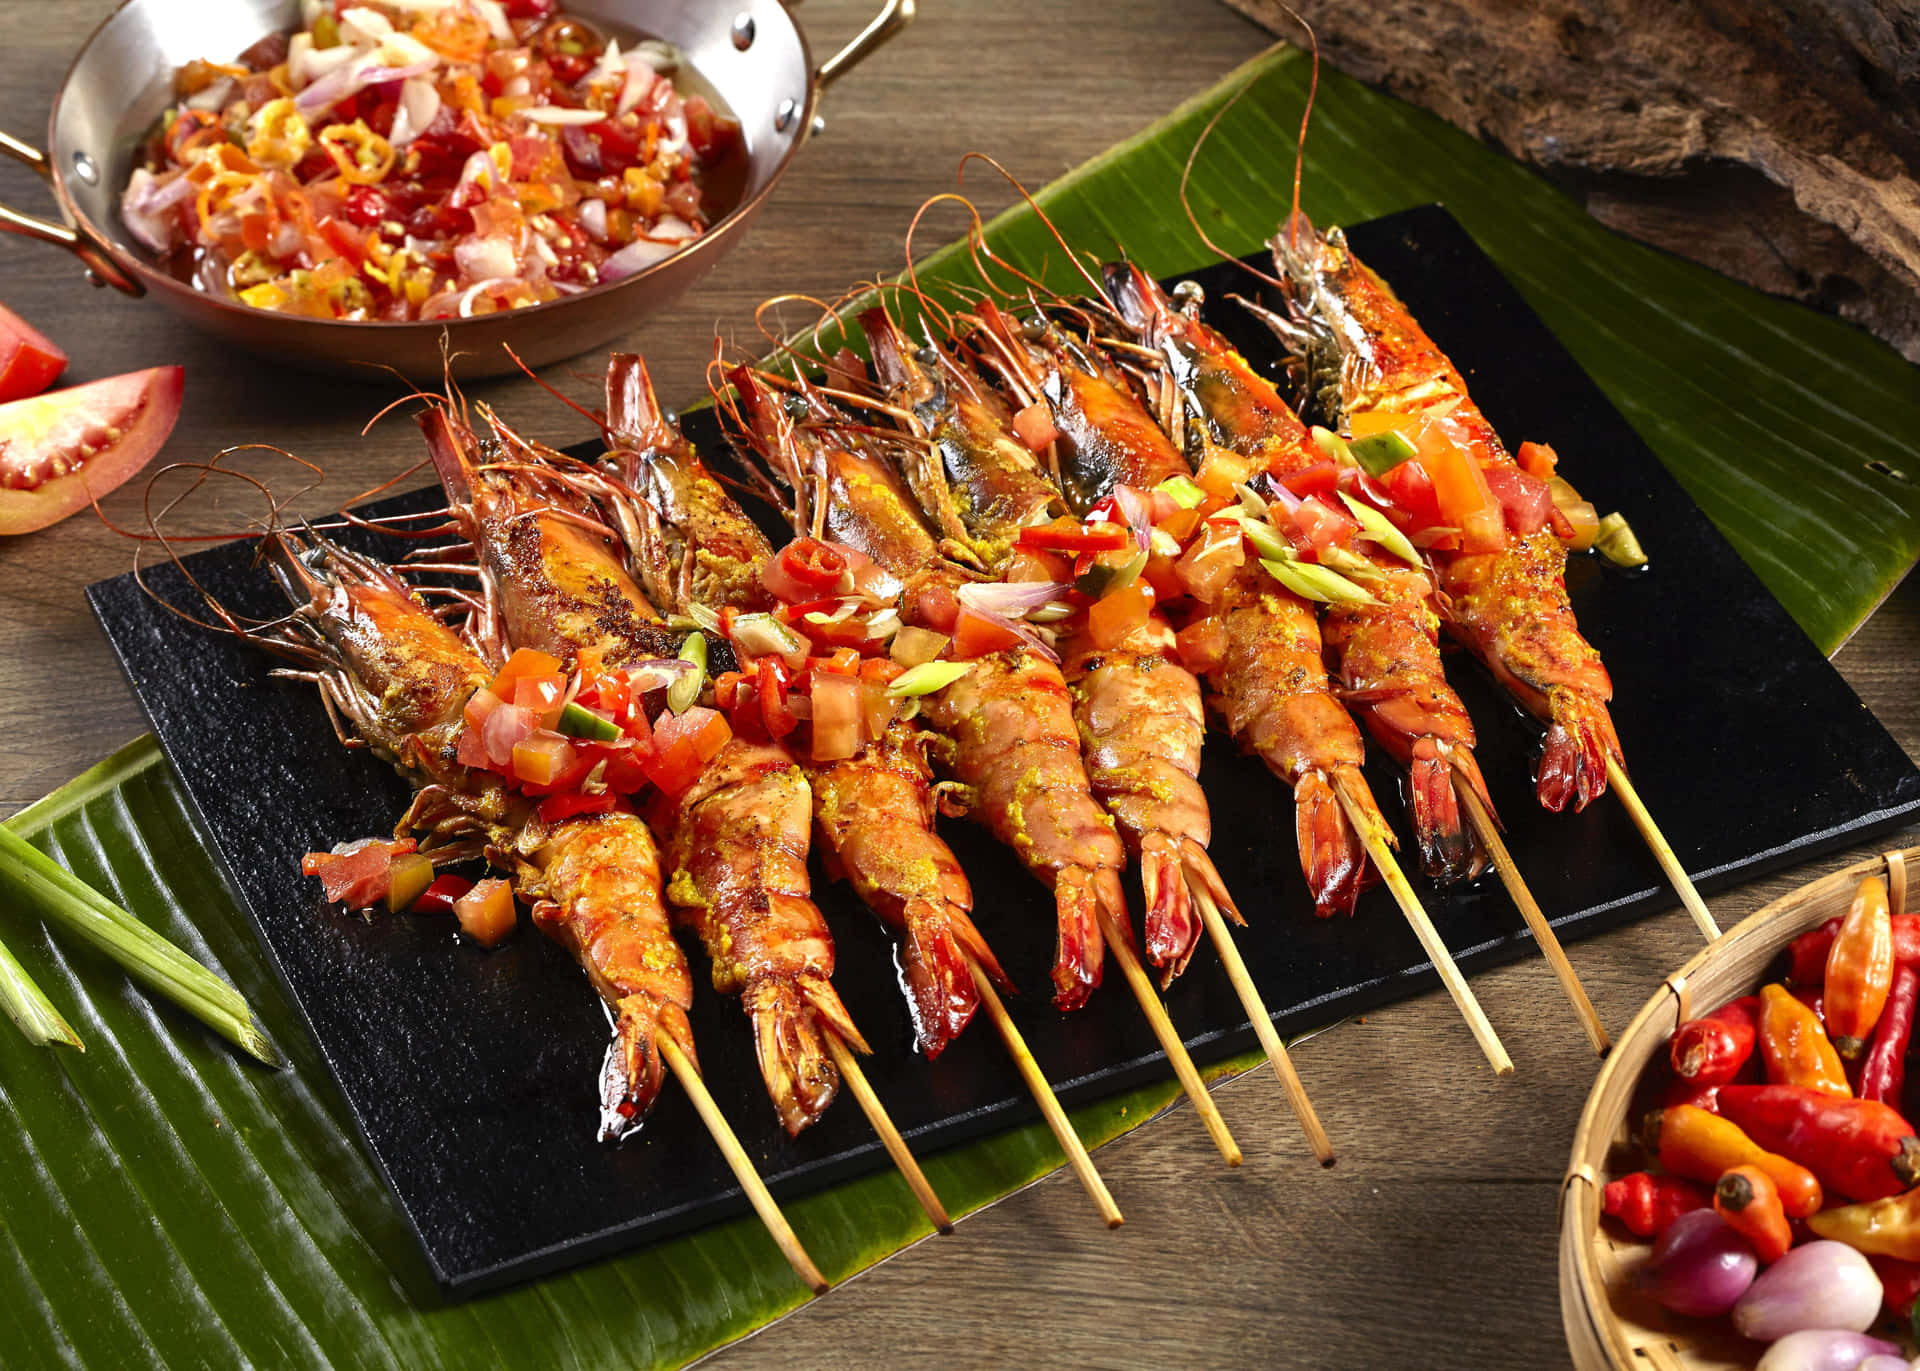 A Plate Of Grilled Shrimp On Skewers